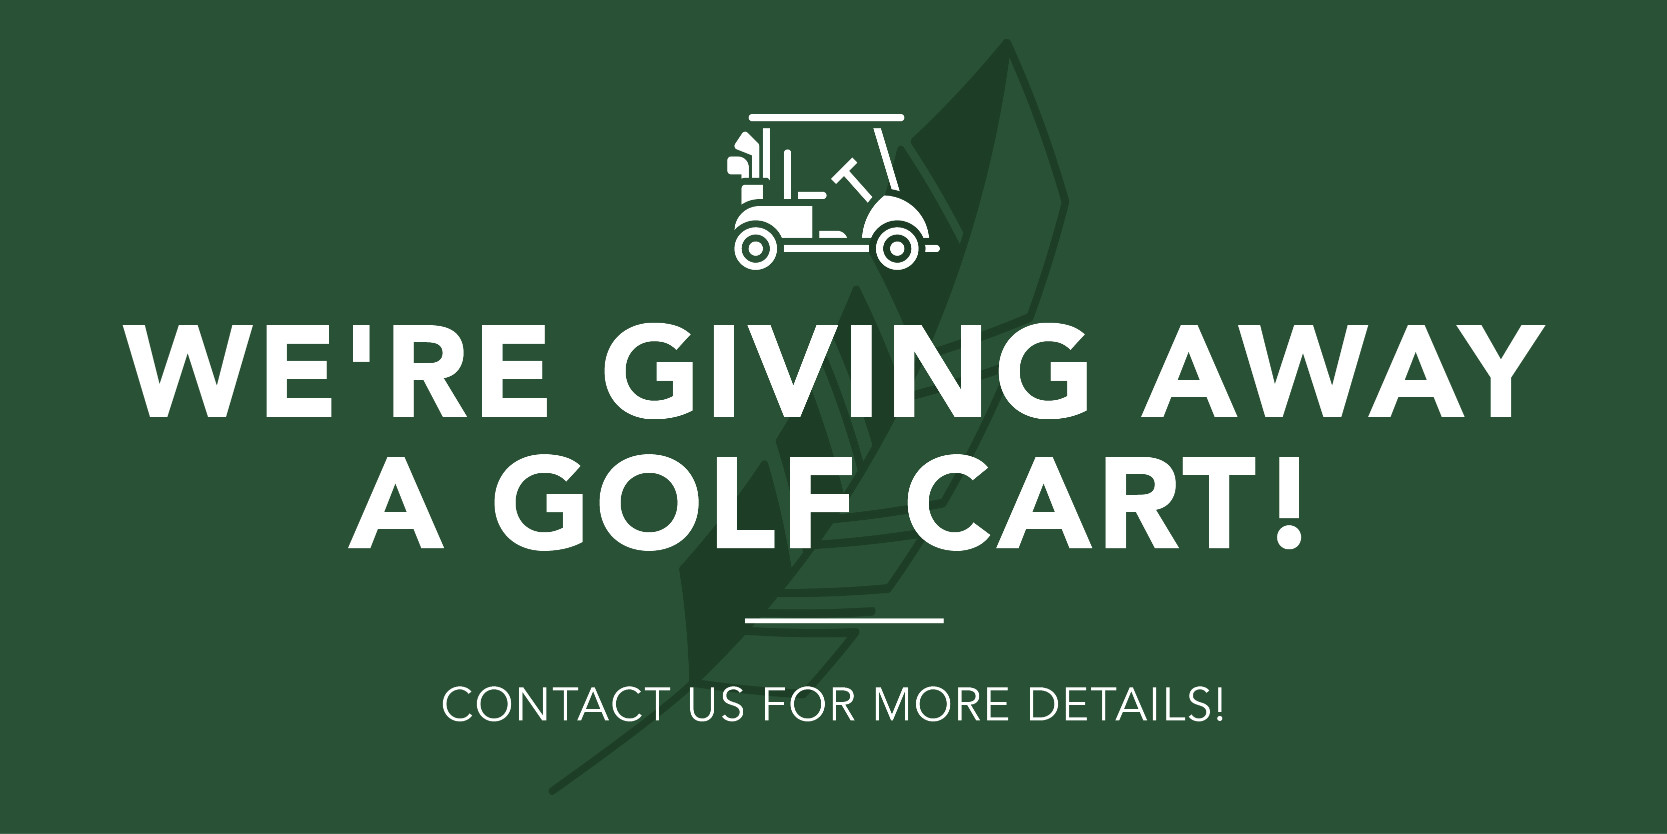 We're giving away a glf cart!  Contact us for more details!